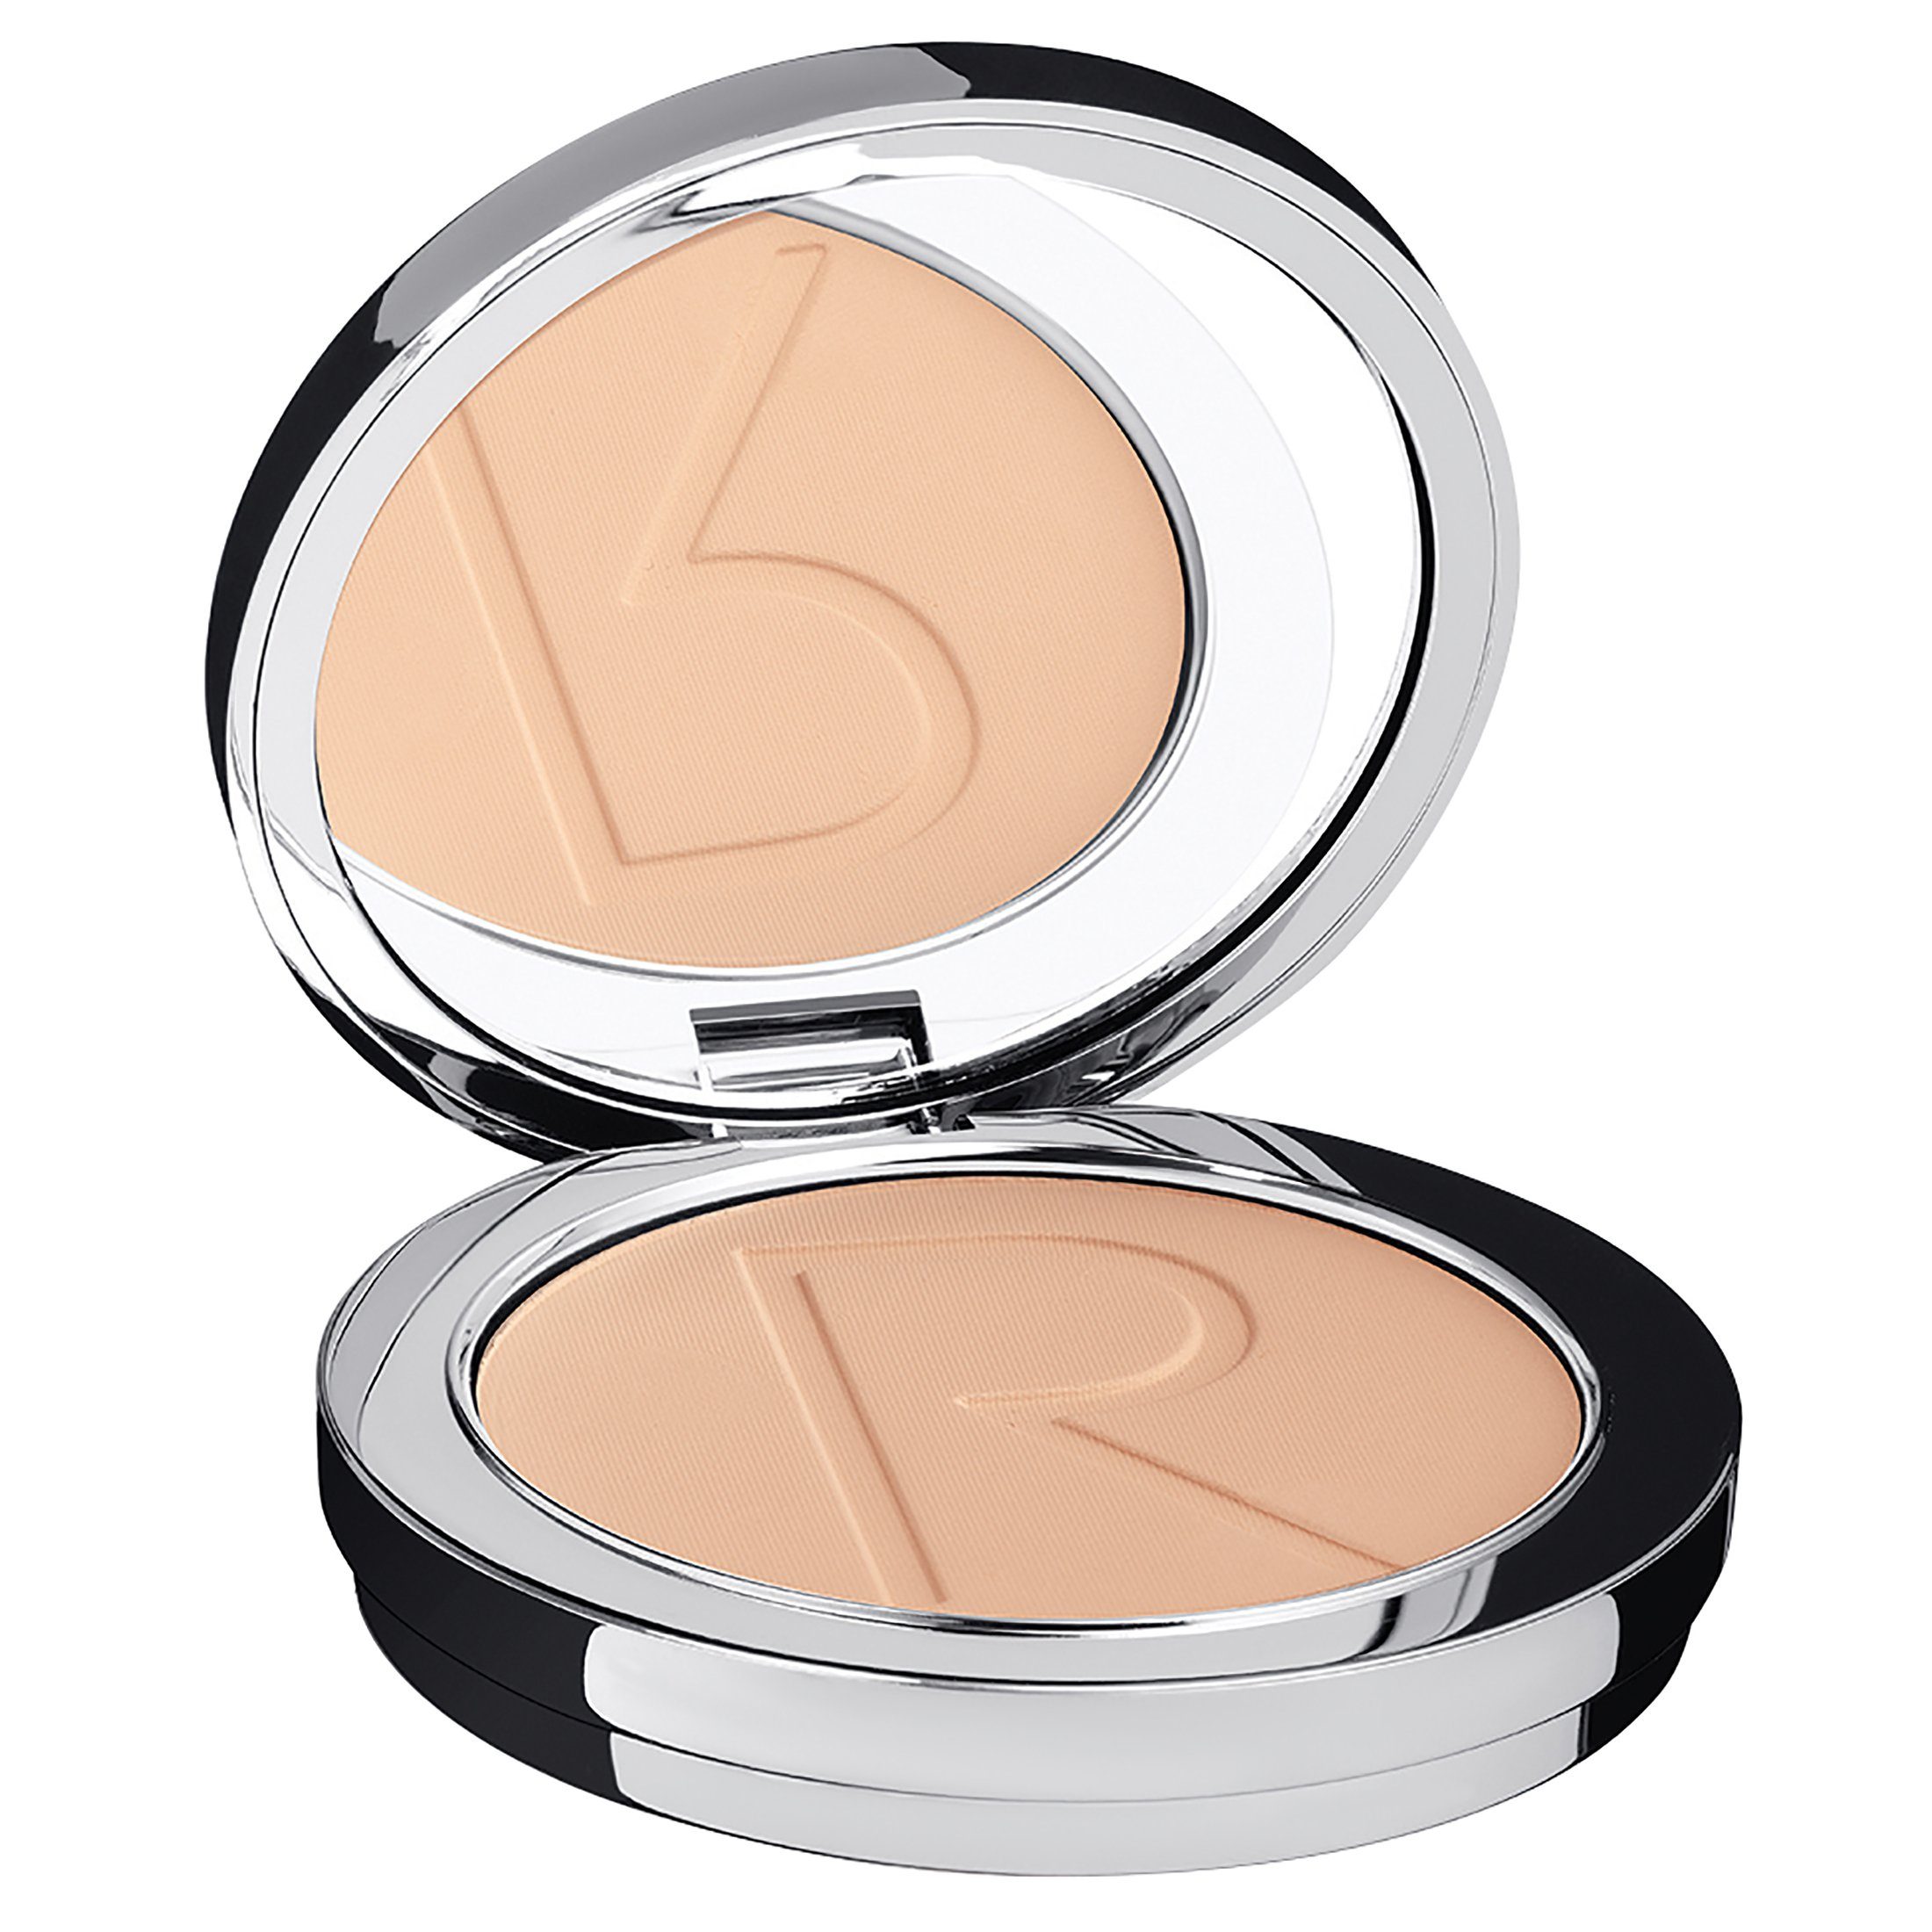 Puder Rodial Powder Puder Glass Rodial Pressed